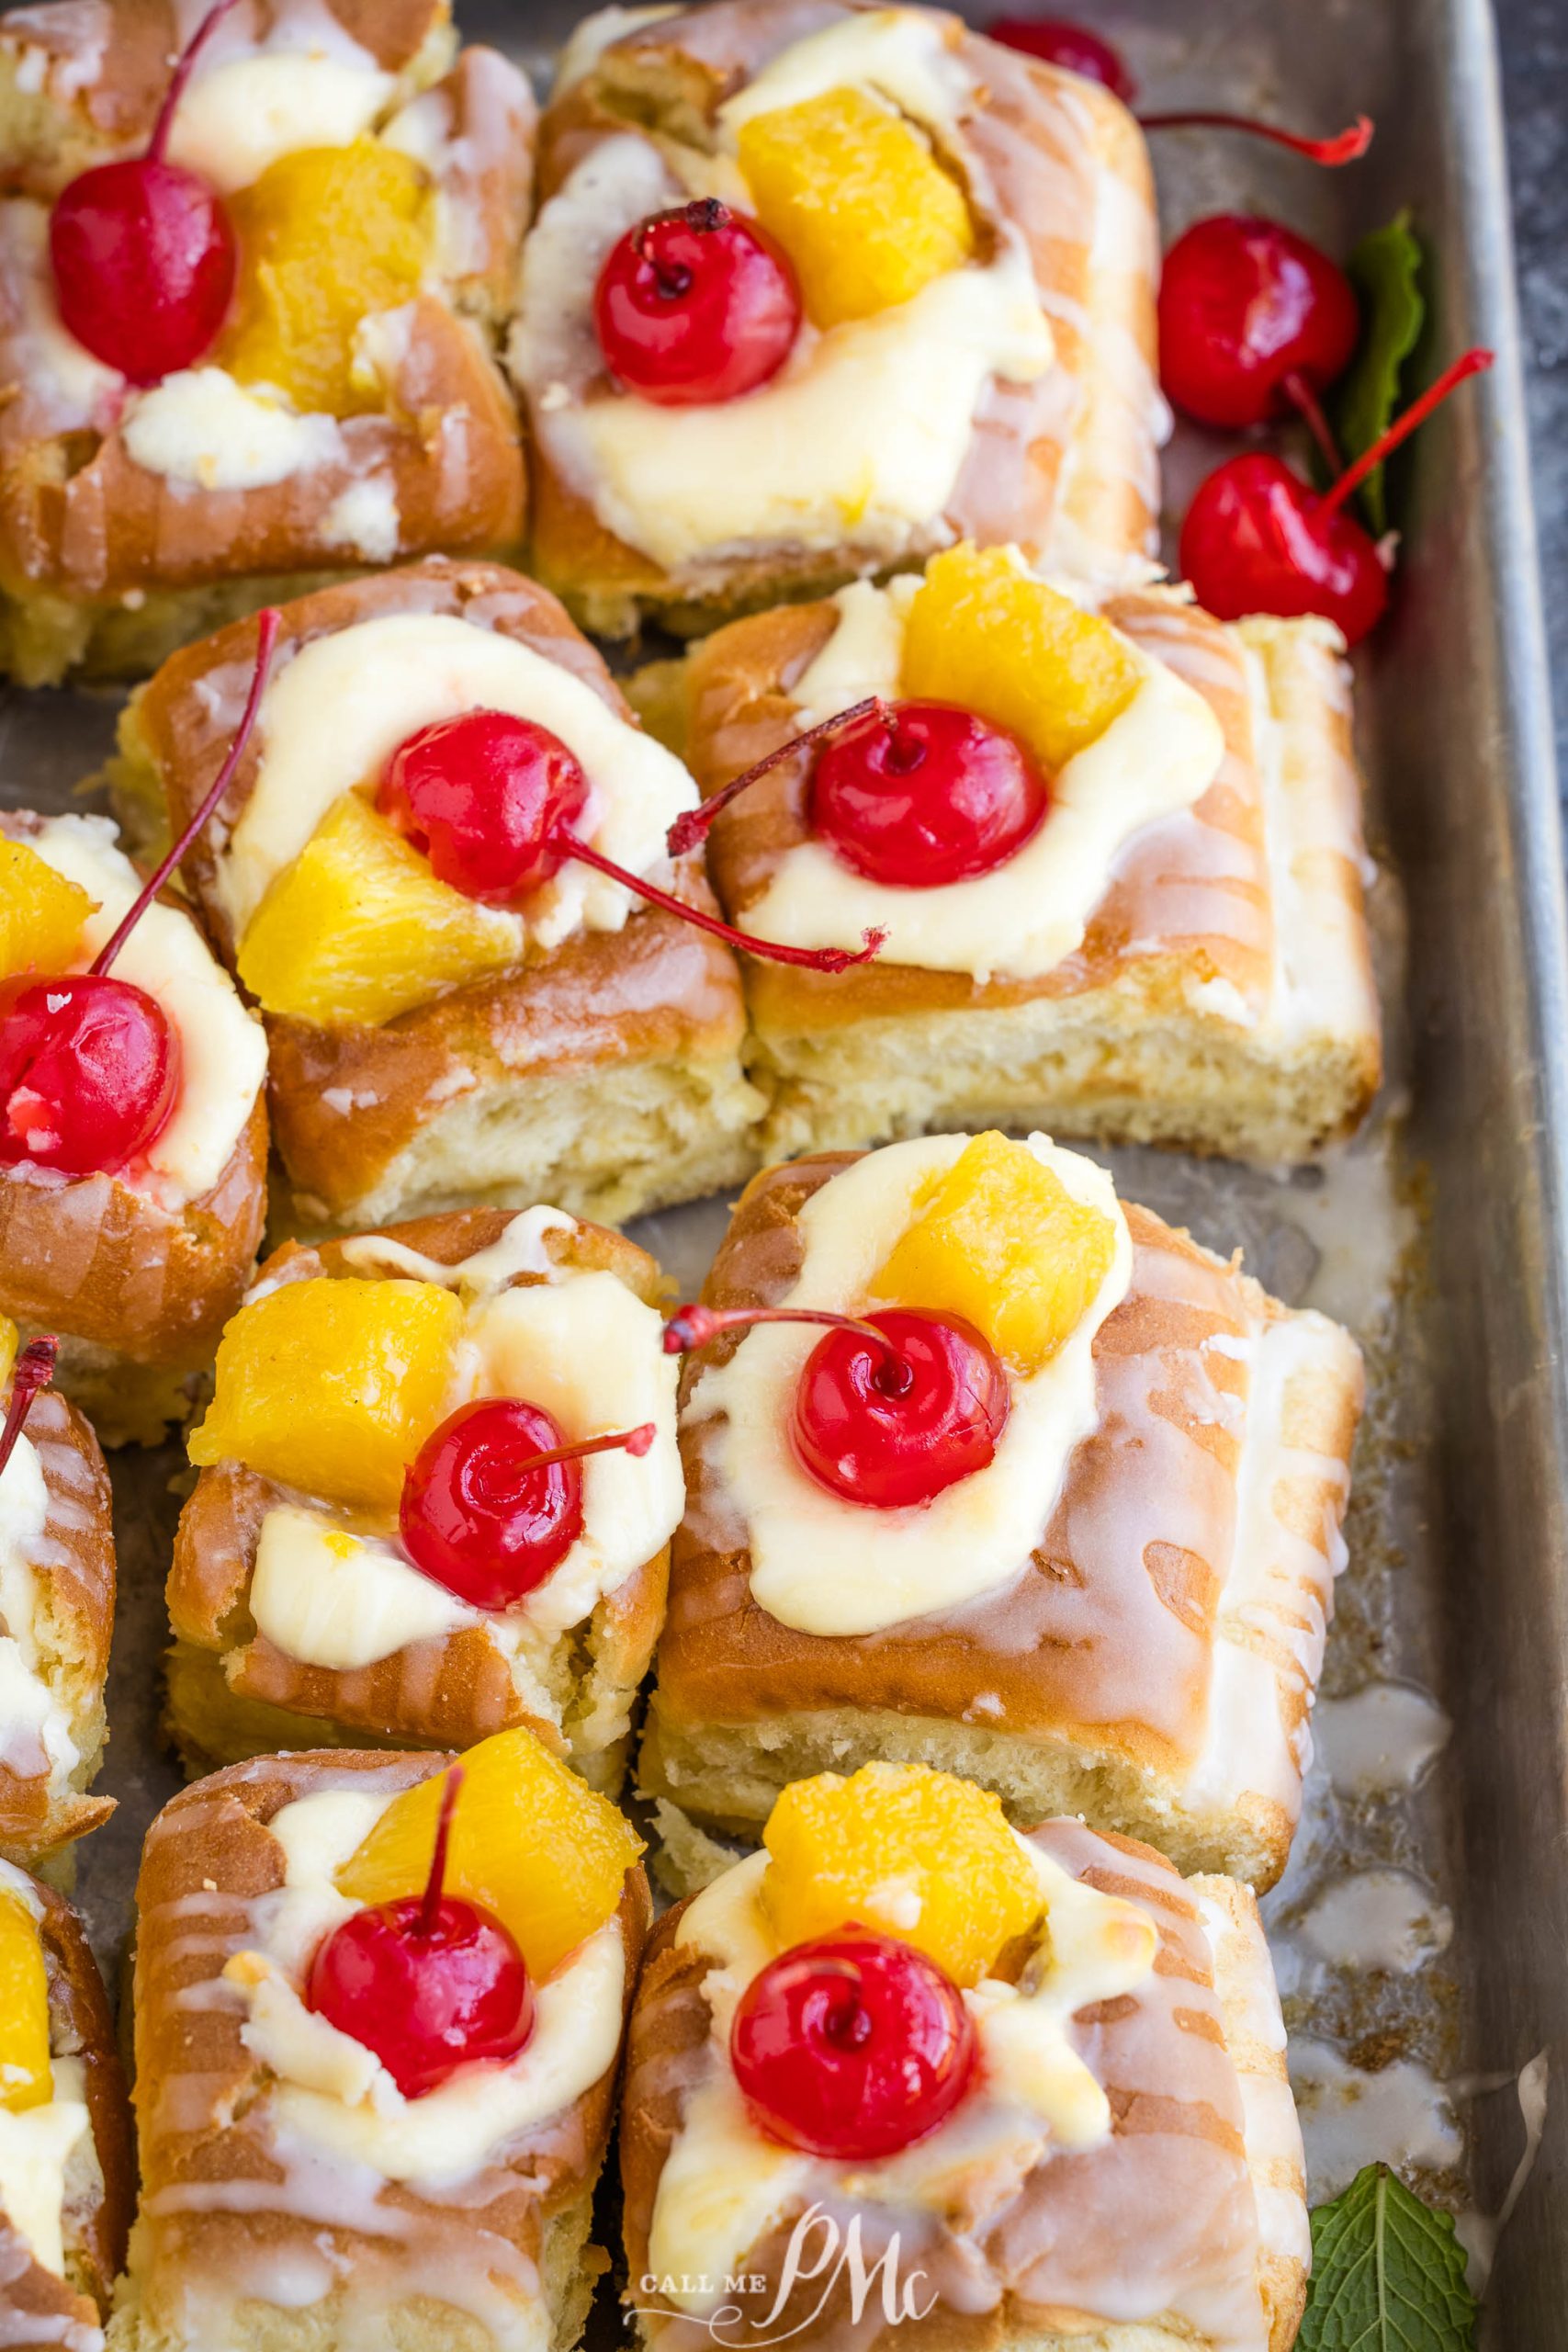 A tray of freshly glazed fruit-topped pastries with cherries and citrus.